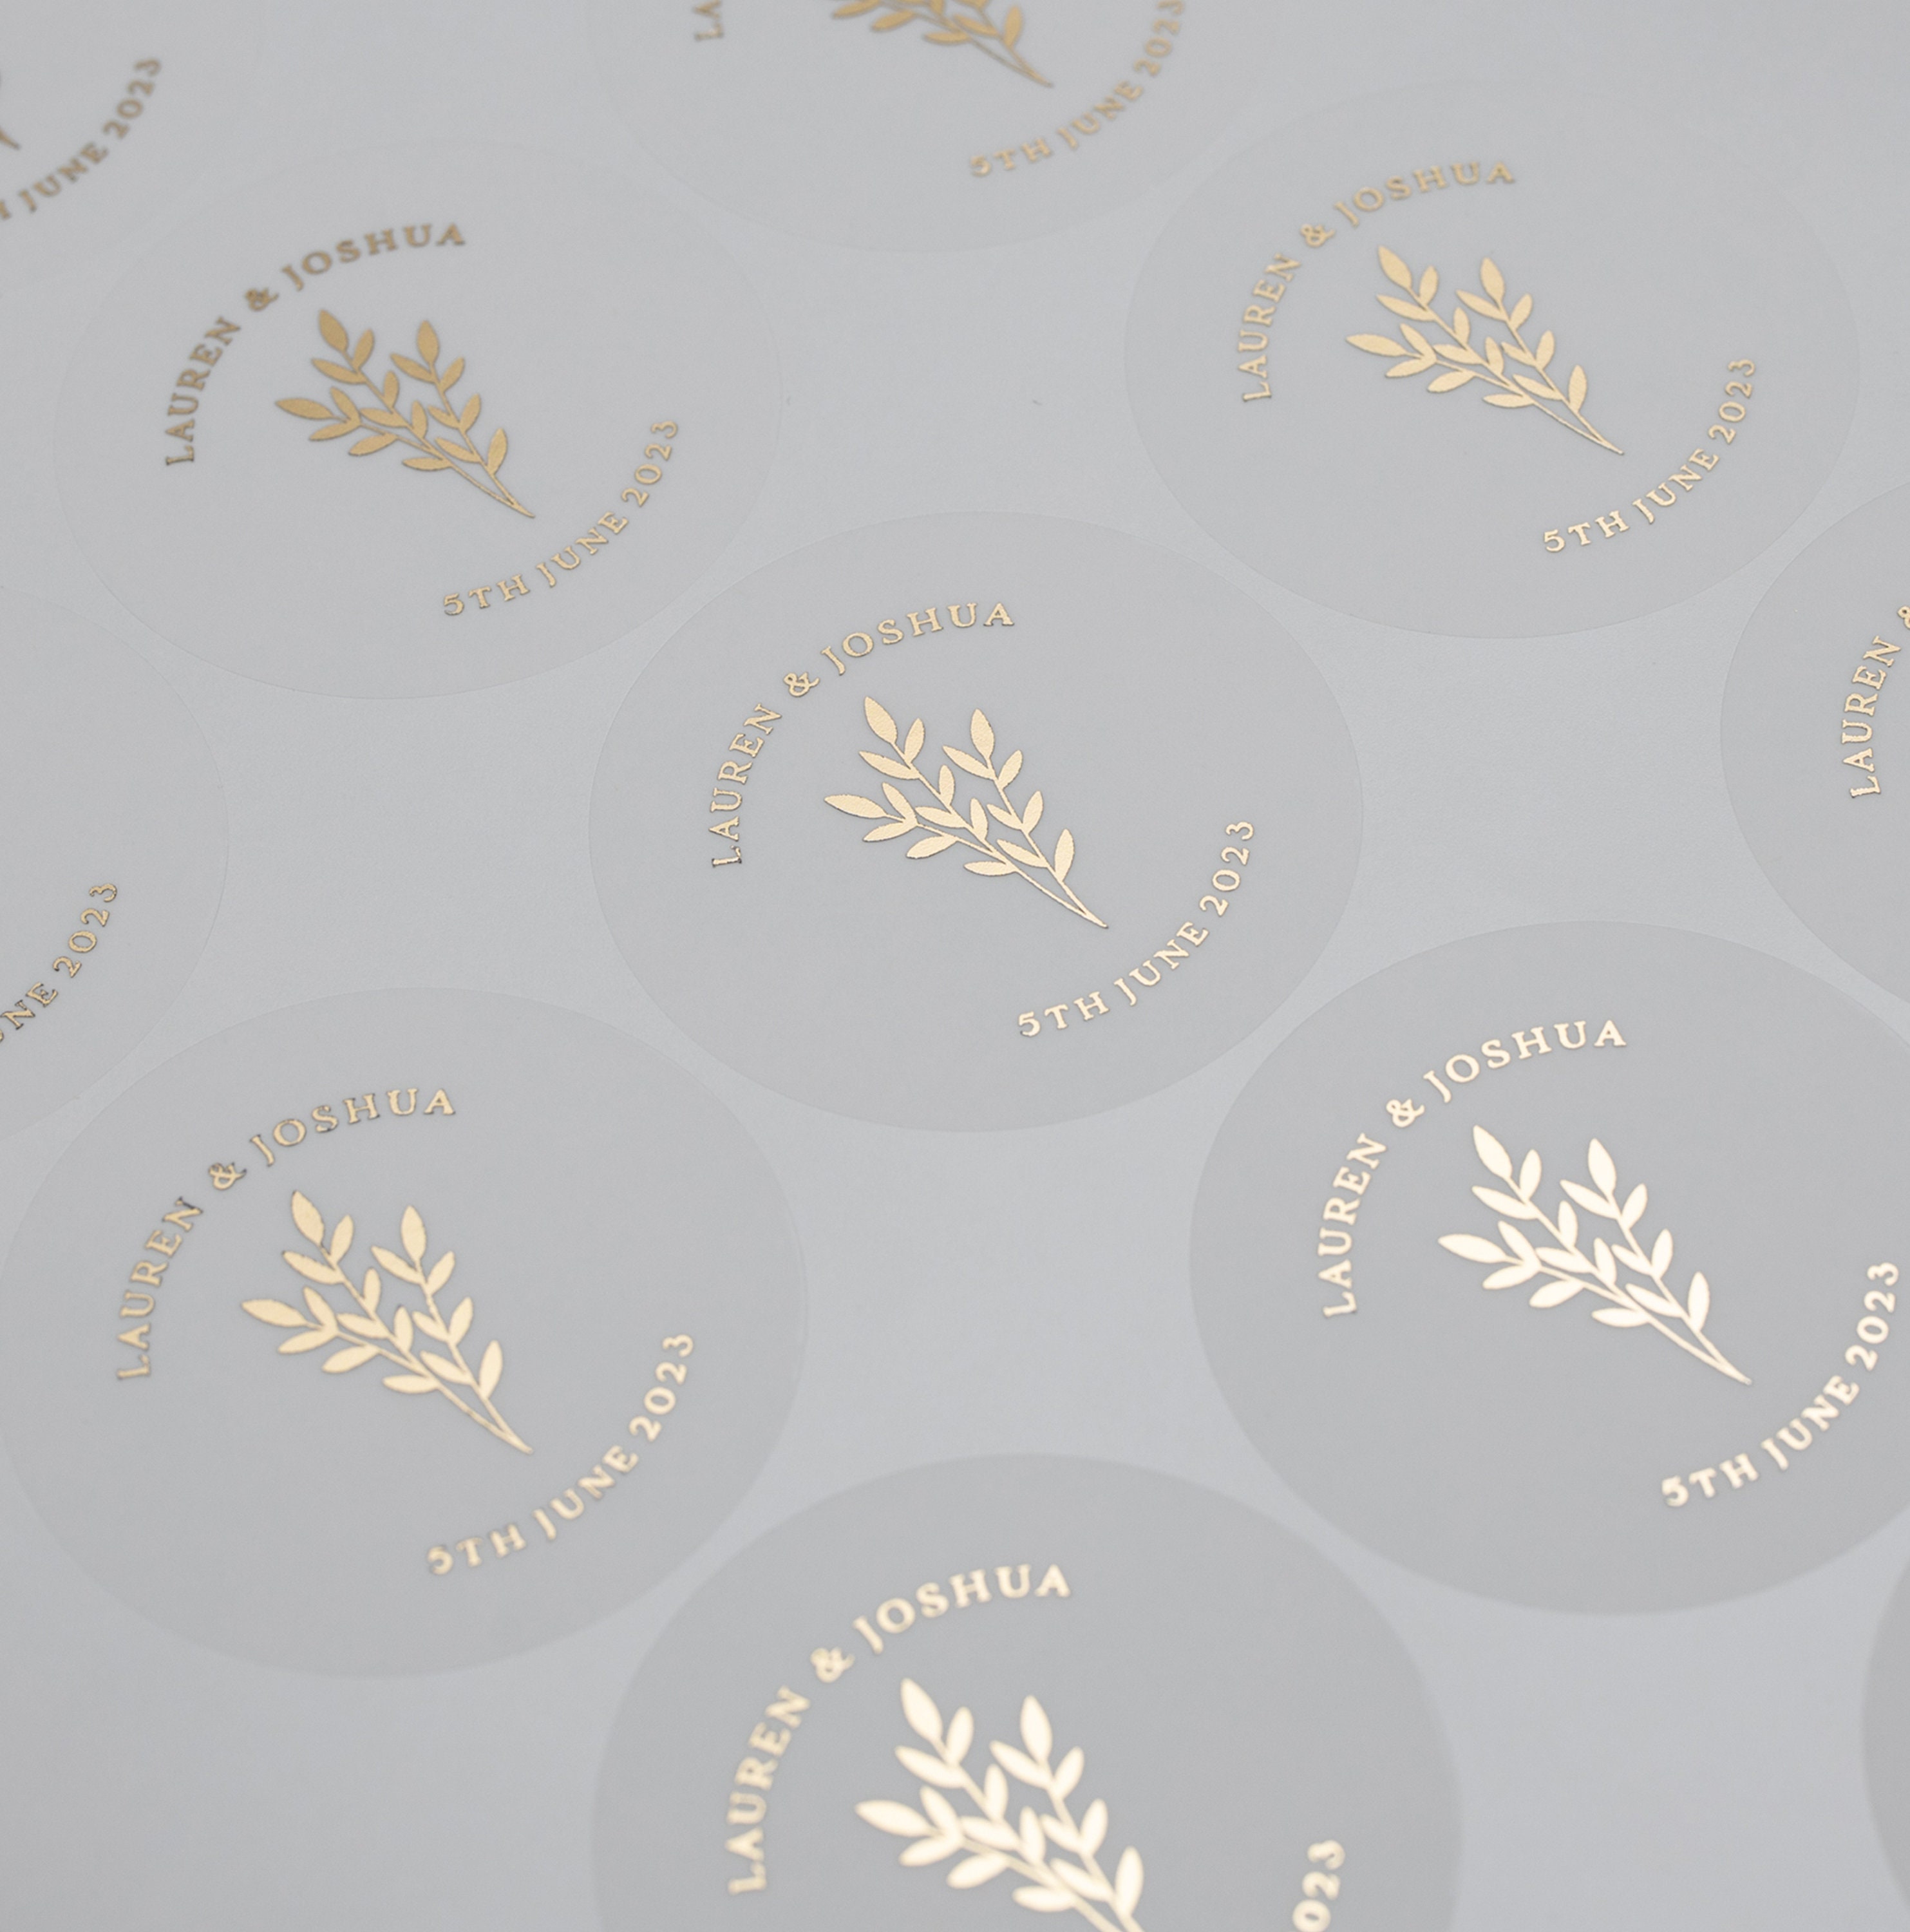 Personalised Foil Stickers, Wedding Invitation Stickers, Gold Foil Seals, Wedding  Stickers Envelope, Silver, Rose Gold Stickers, 37mm ST002 